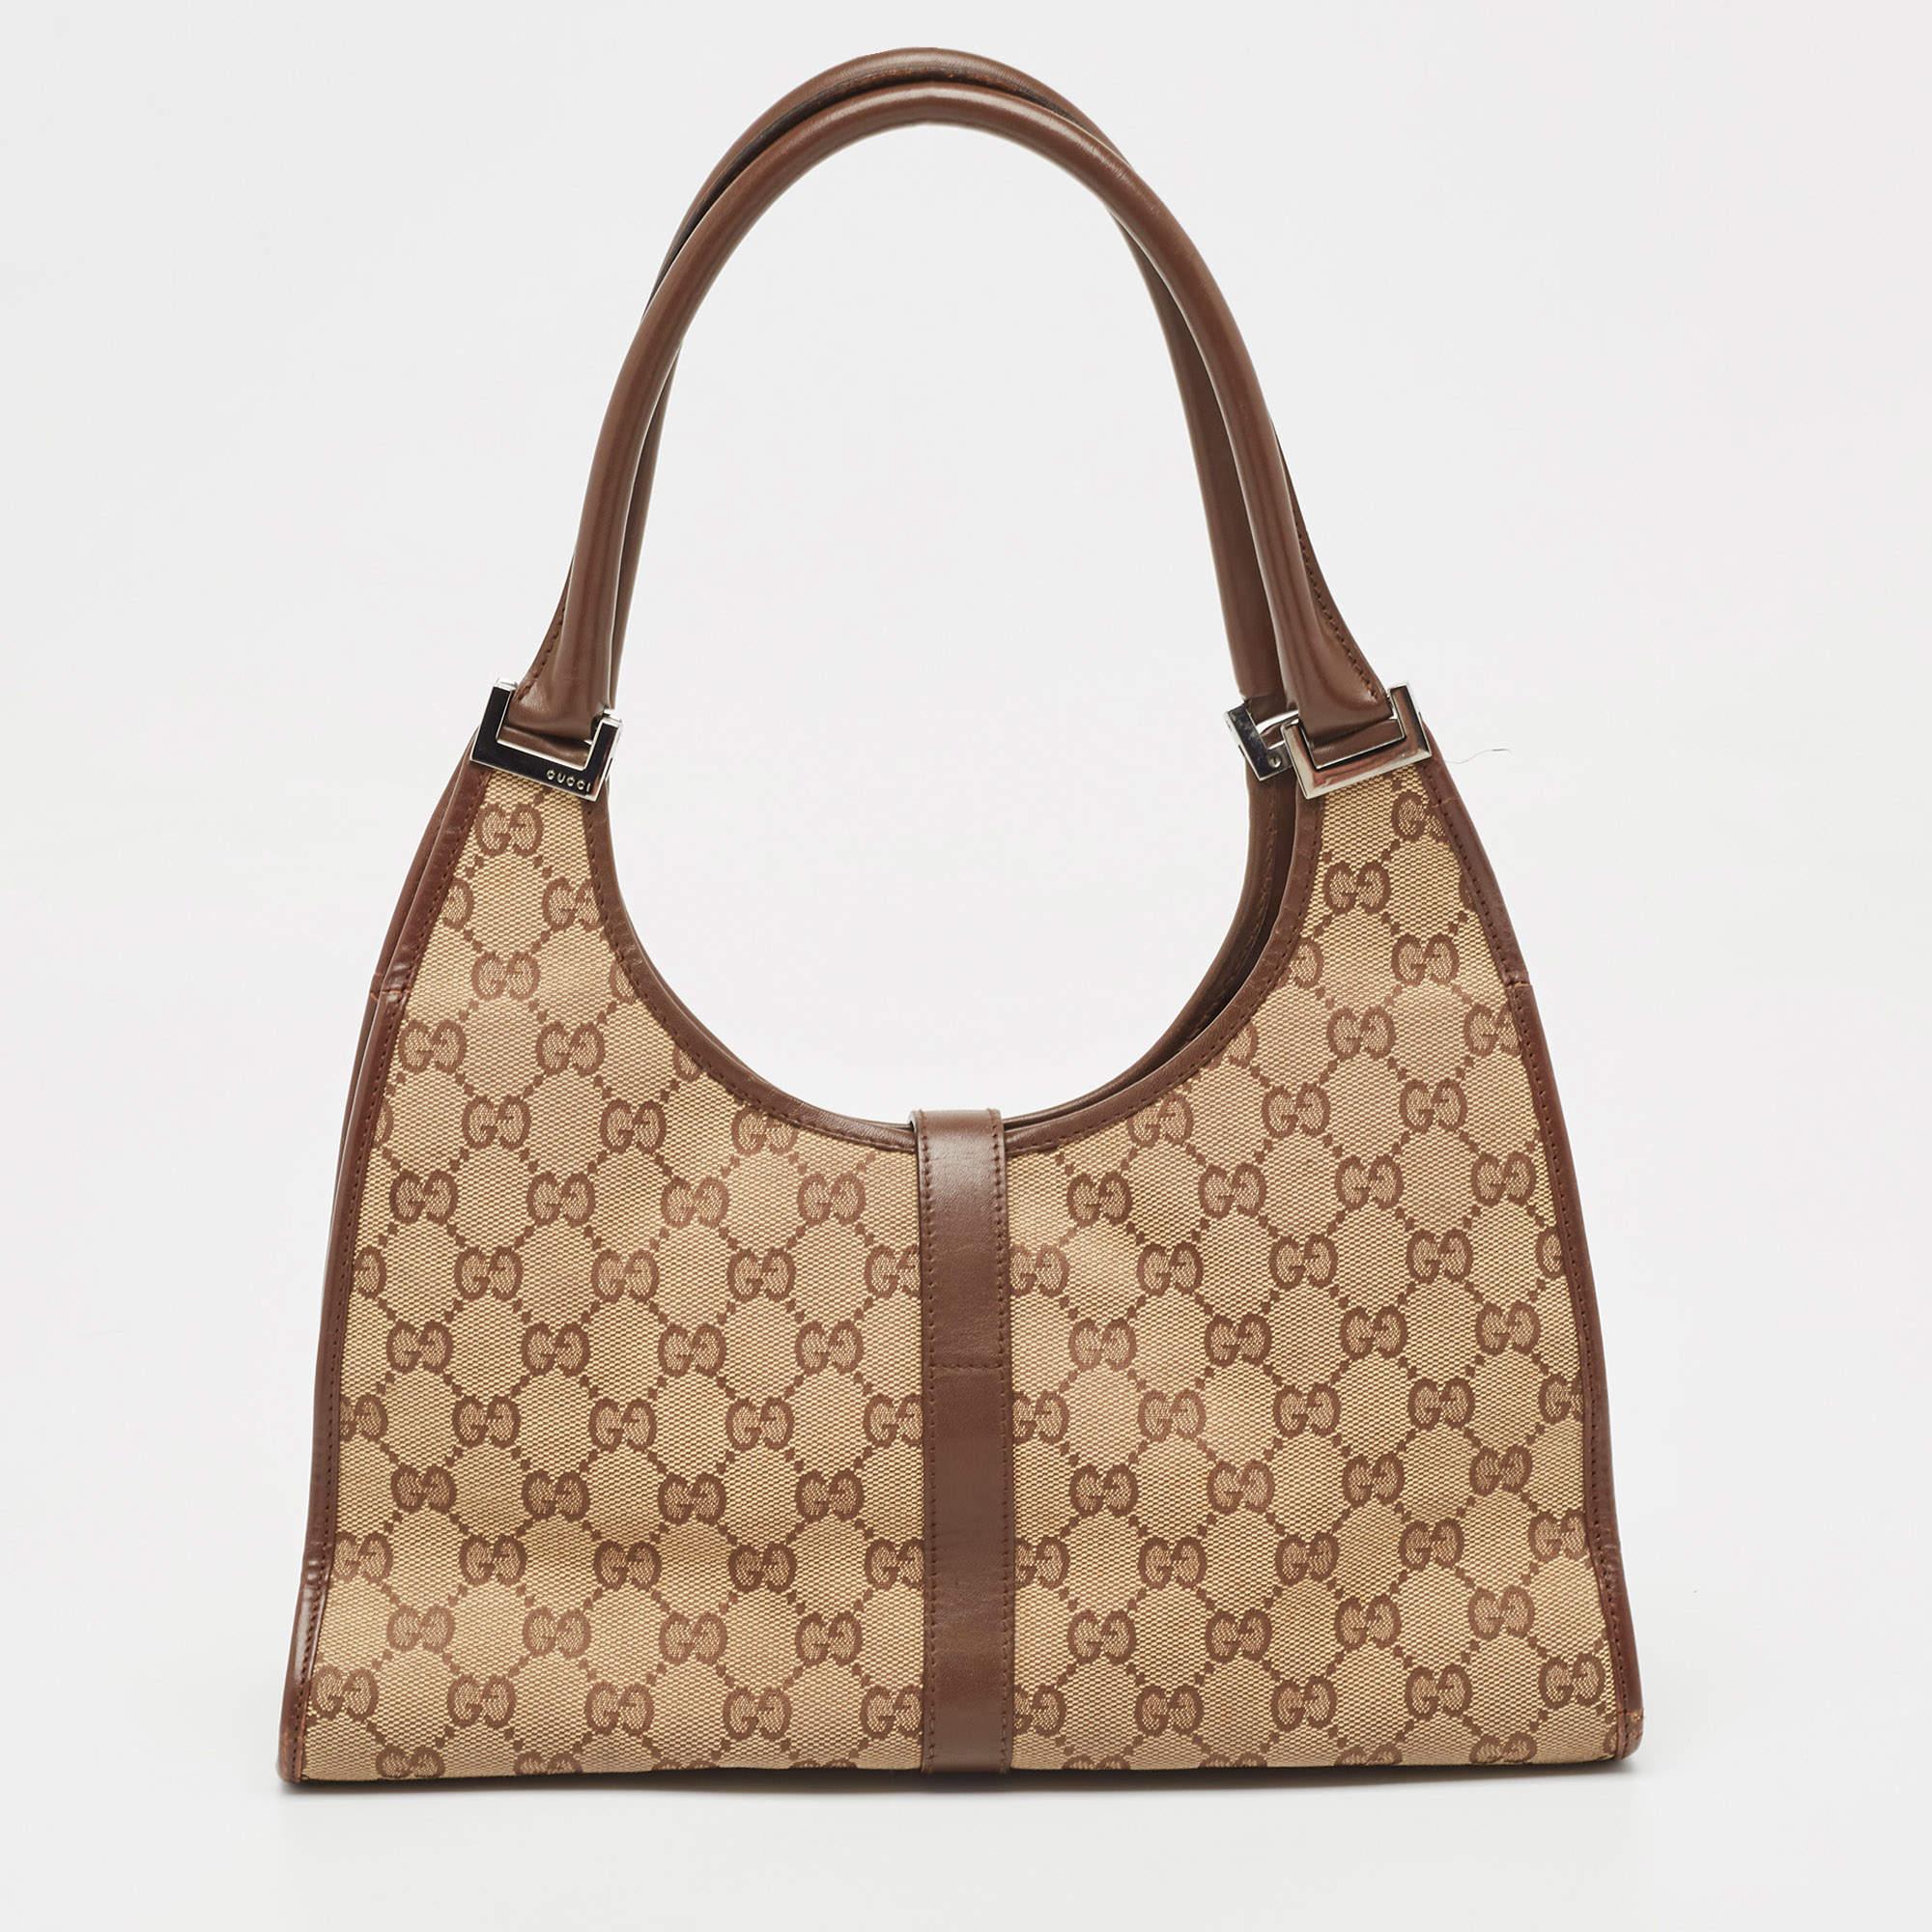 Indulge in timeless luxury with this Gucci bag. Meticulously crafted, this iconic piece combines heritage, elegance, and craftsmanship, elevating your style to a level of unmatched sophistication.

